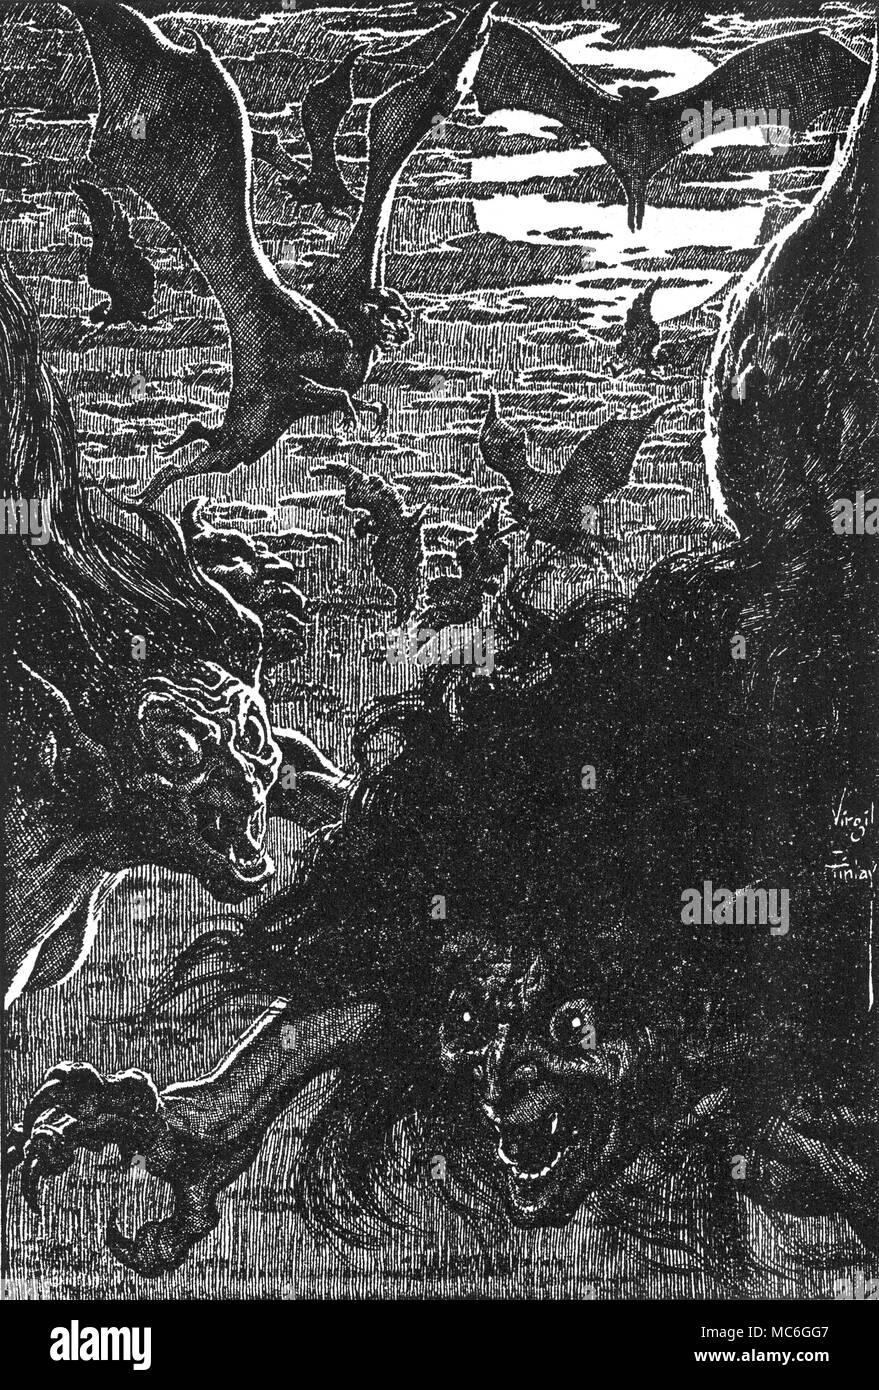 FANTASY - MONSTERS Illustration by Virgil Finlay for a poem by H.P. Lovecraft, Hallowe'en in a Suburb. From Wierd Tales, 1952. Stock Photo